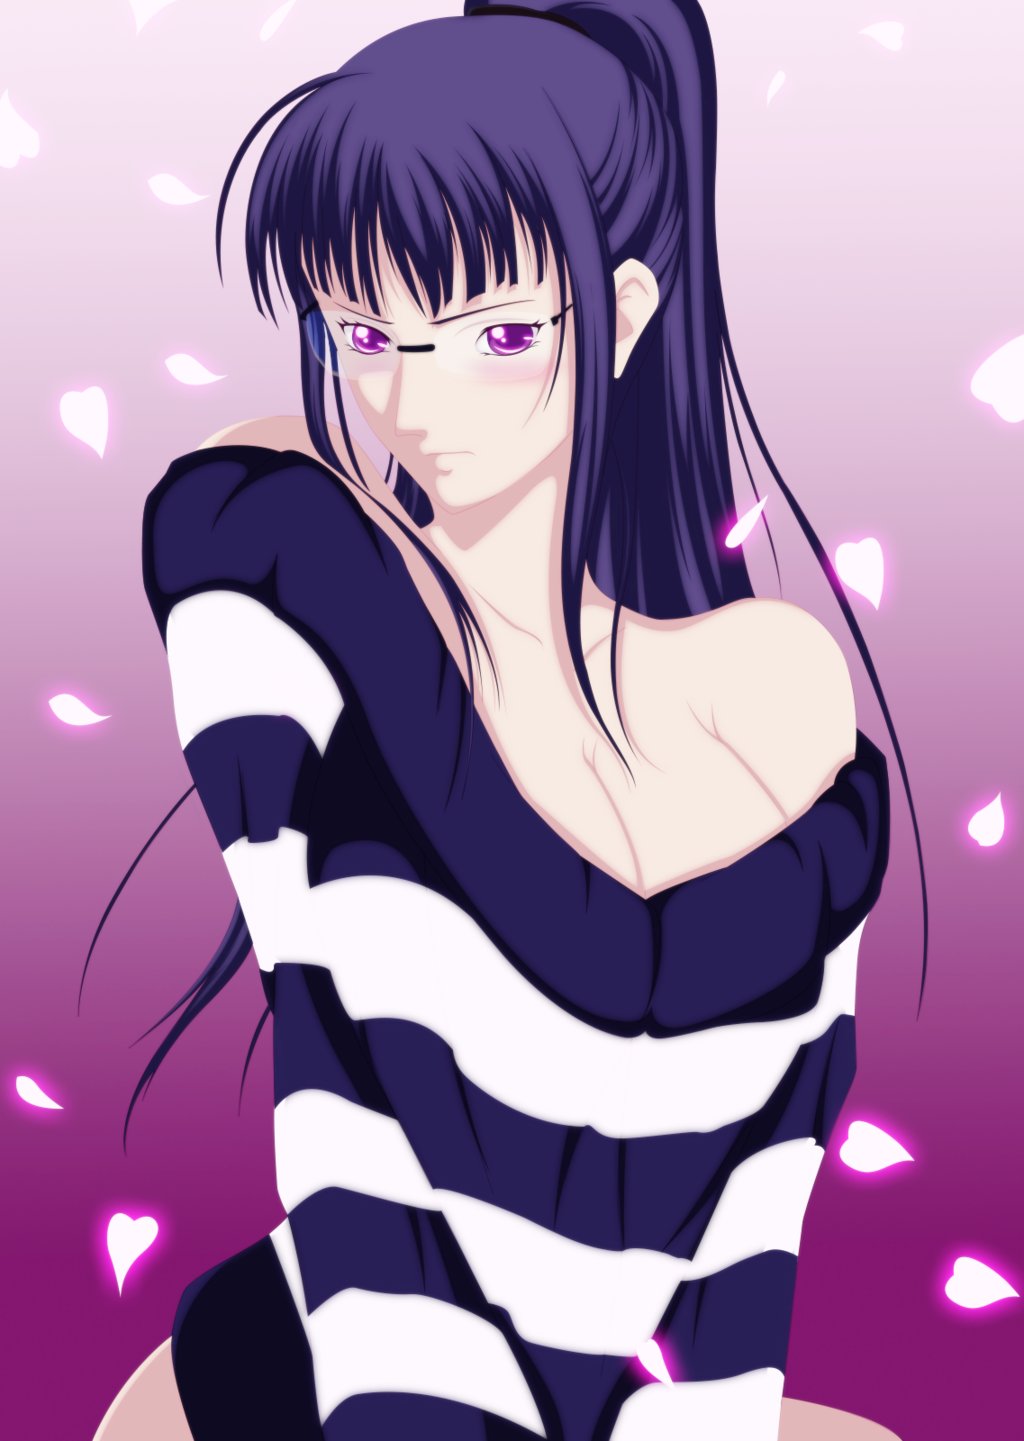 Nico robin wallpaper is the best app to make your phone more cool and amazi...